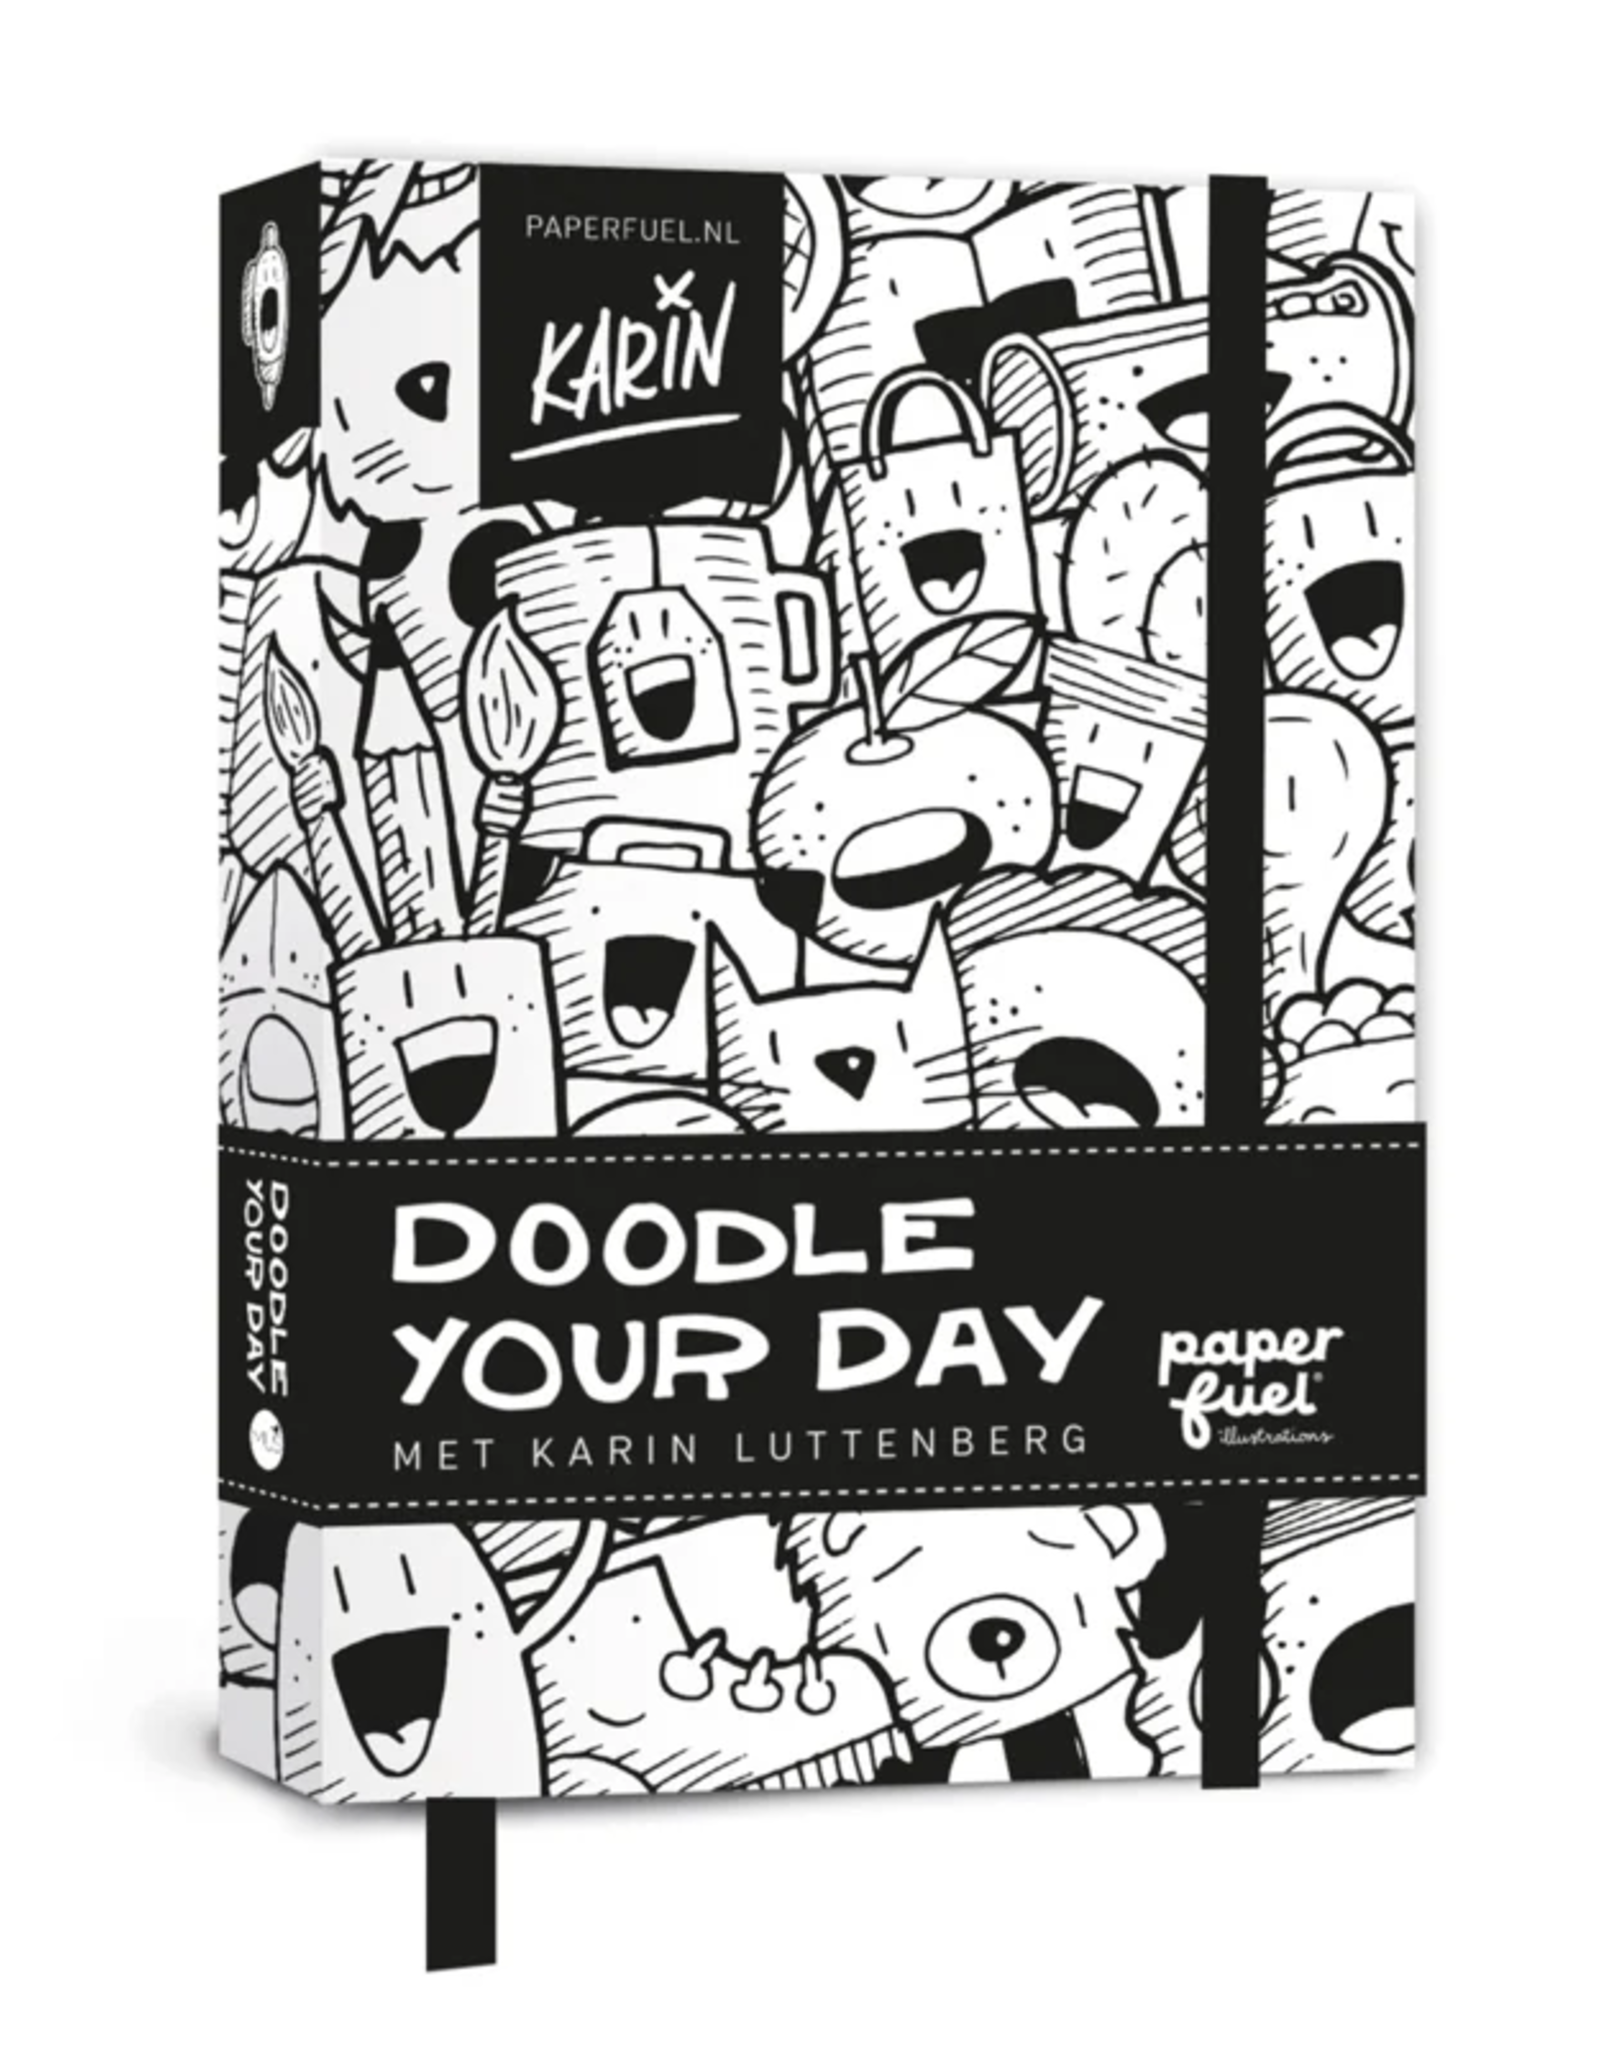 Paperfuel Doodle Your Day